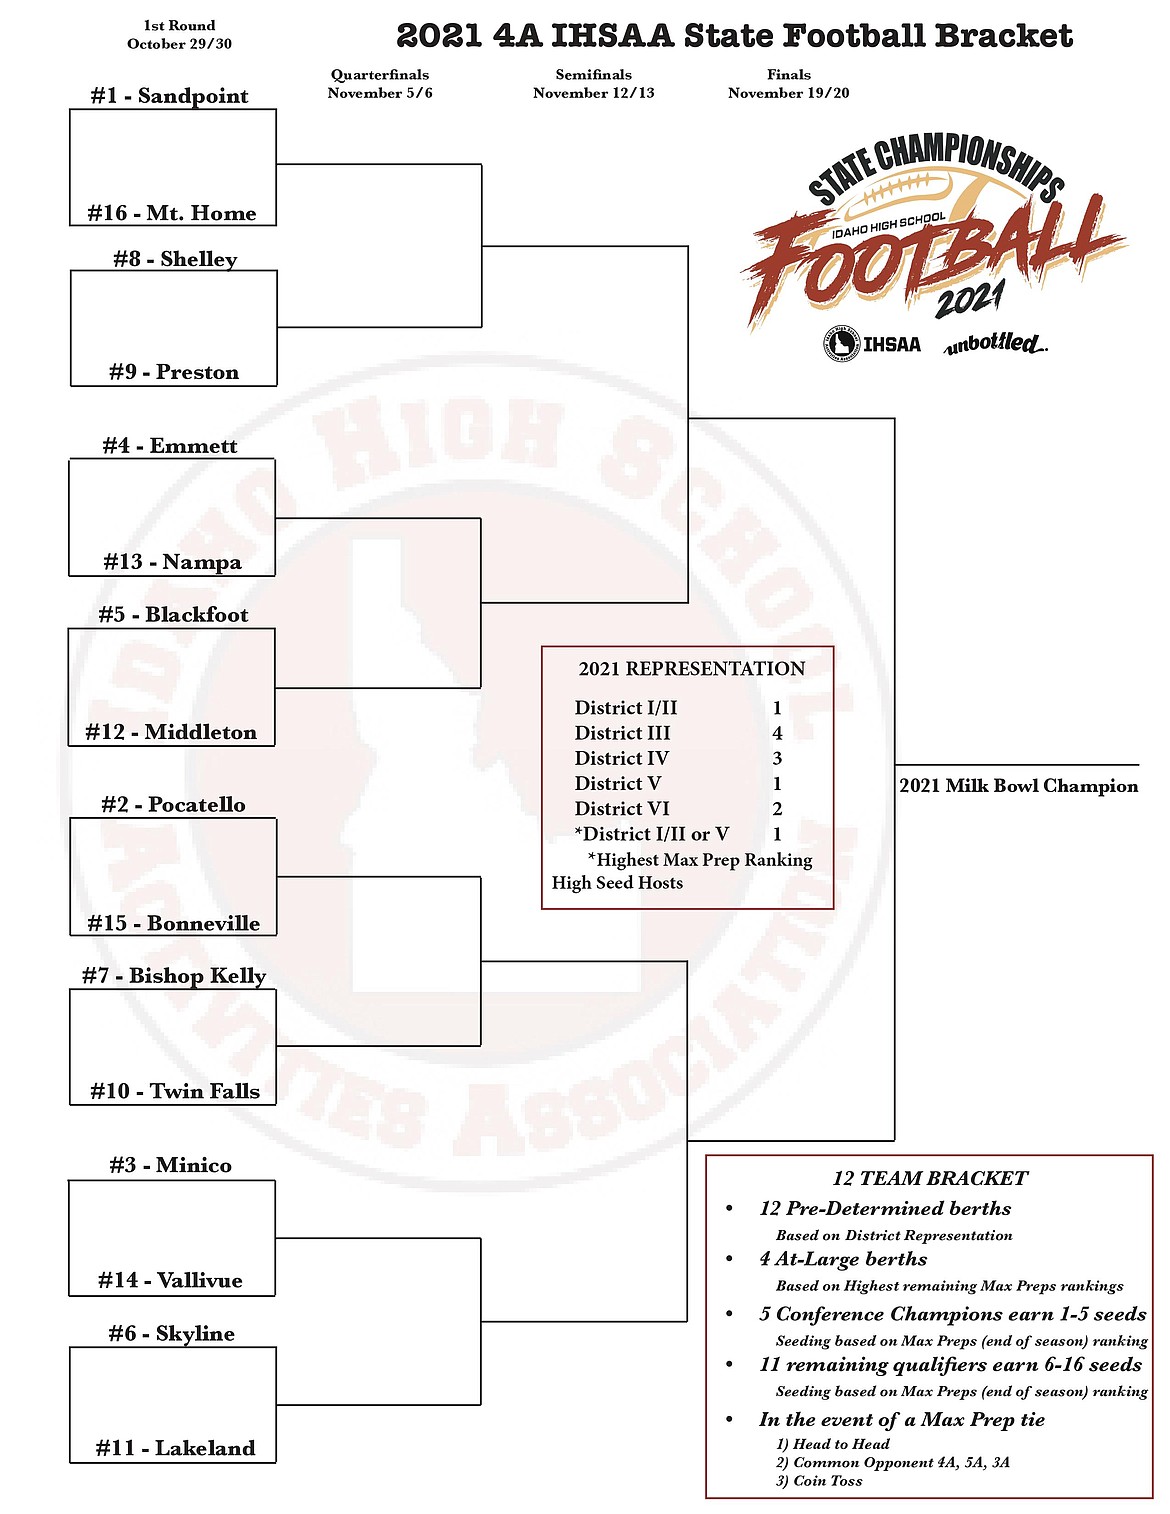 The 4A state playoff bracket.